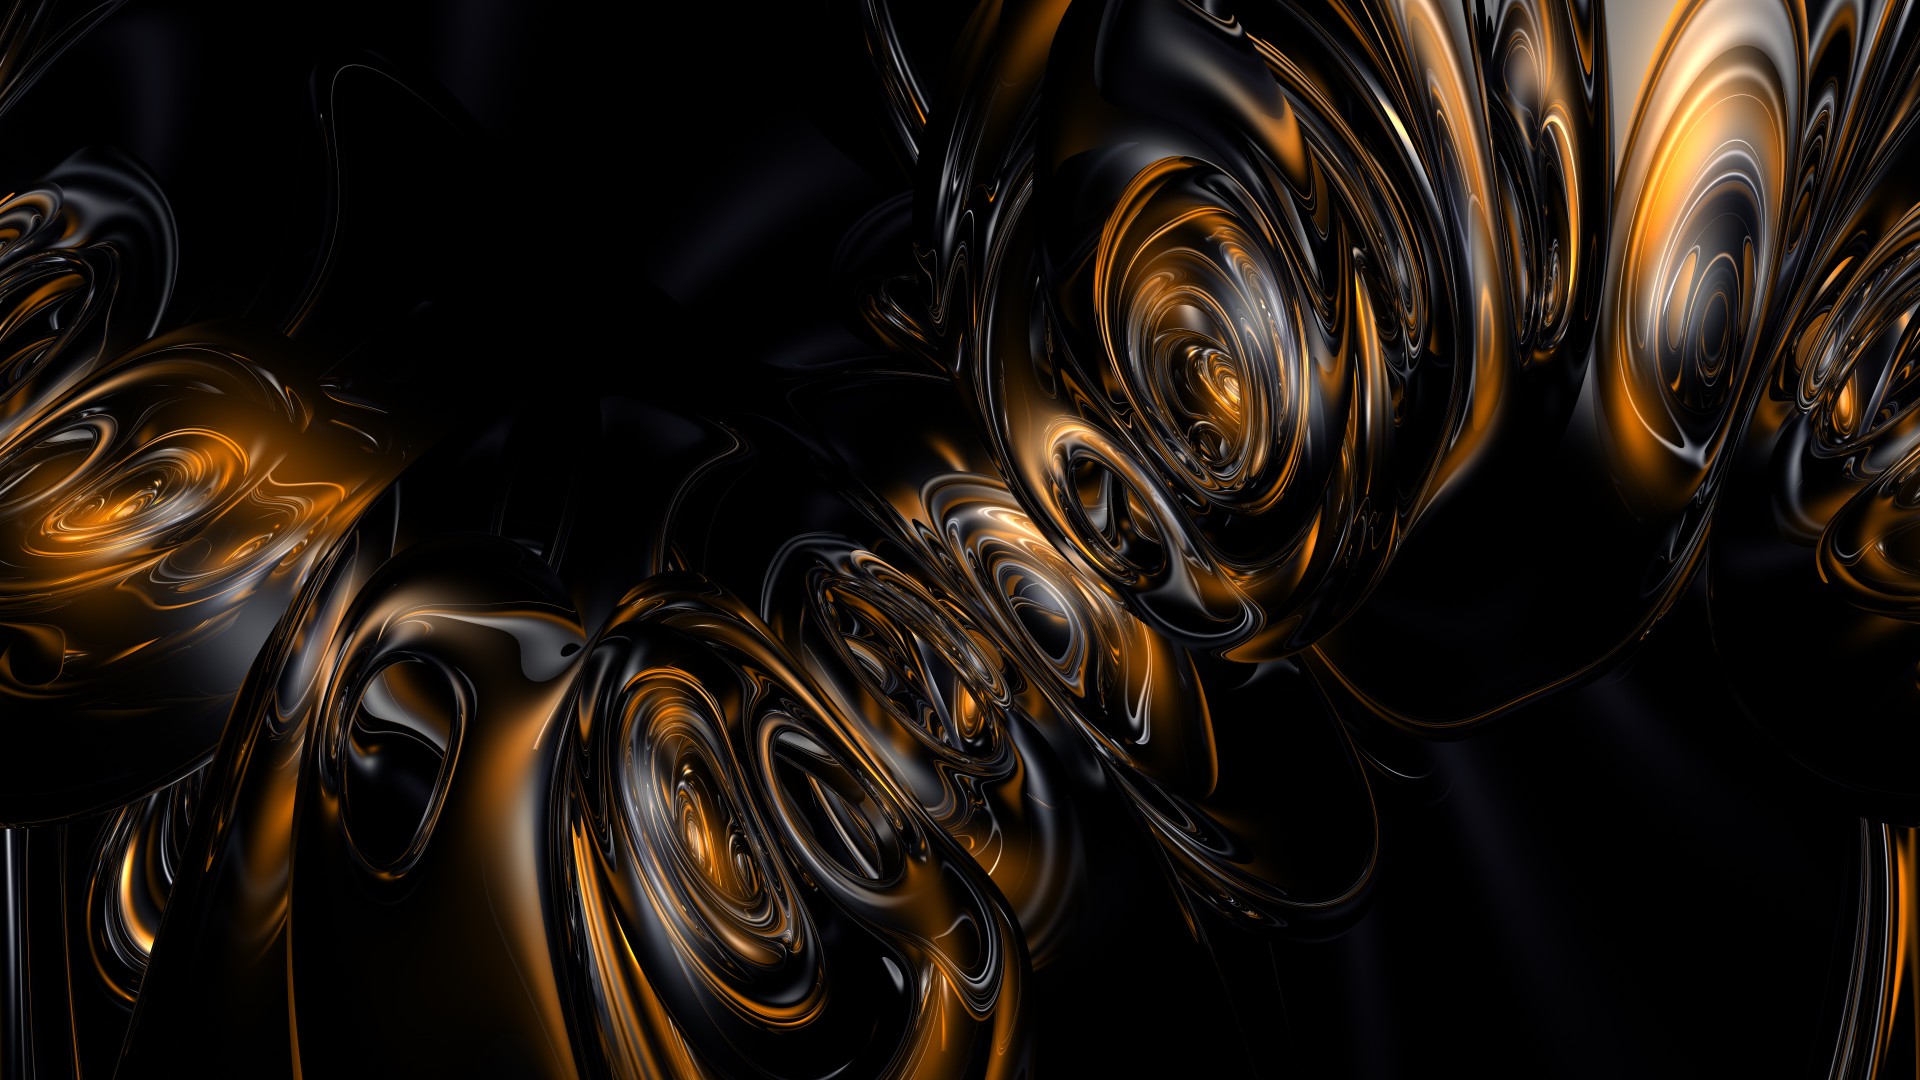 Black And Orange Wallpapers Abstract - HD Wallpaper 